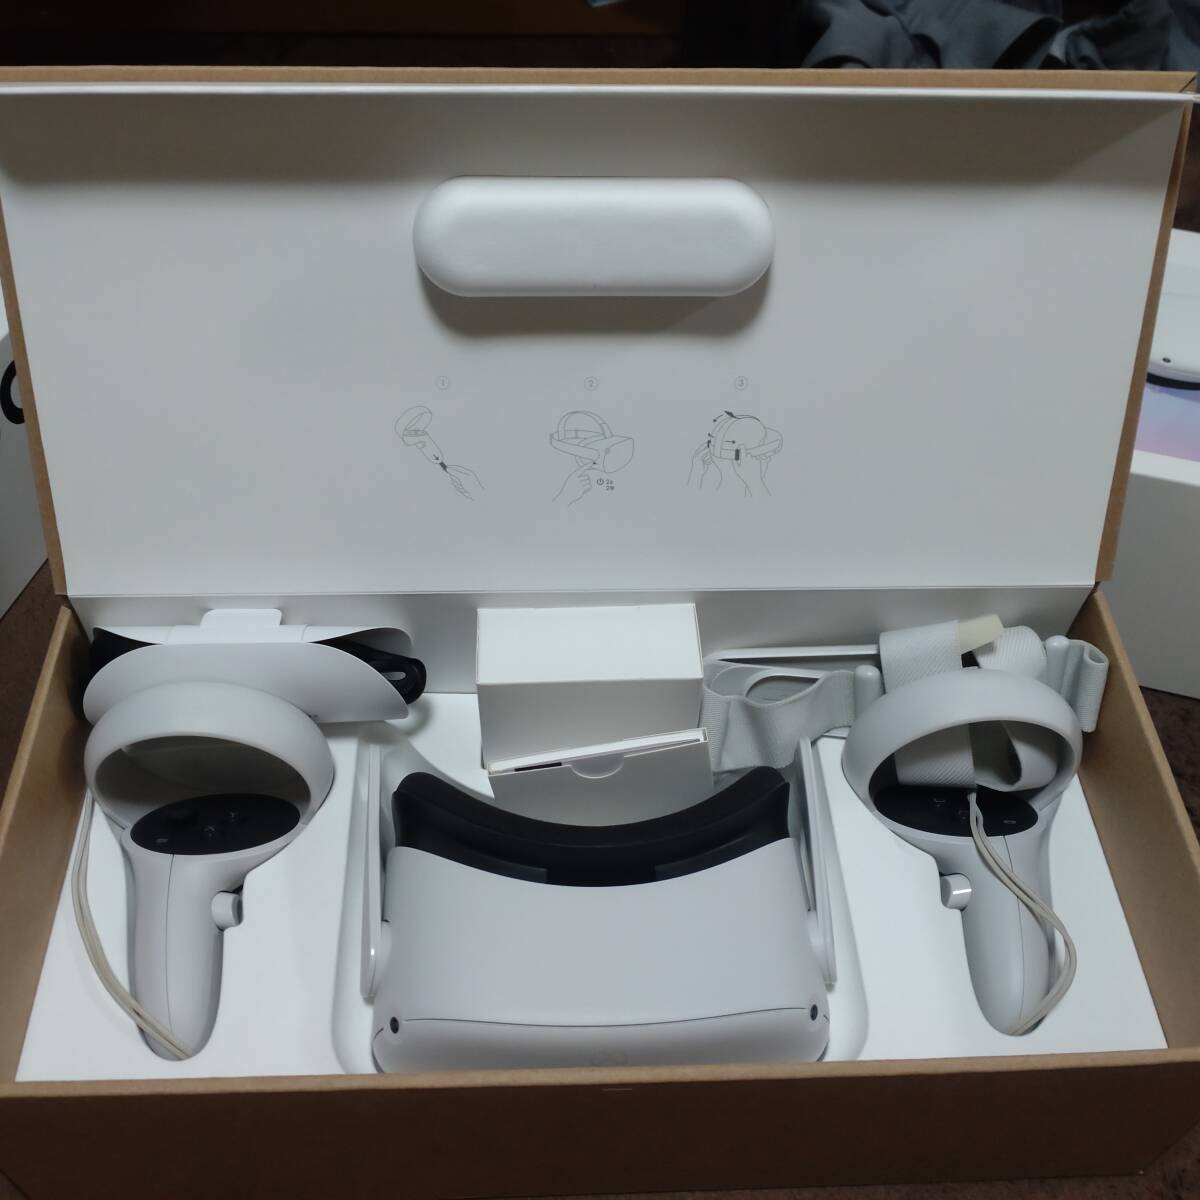 Meta Quest2 128GBmeta Quest 2 VR head mounted display electrification verification OKokyulas accessory have Q2FC Erite case present condition goods.